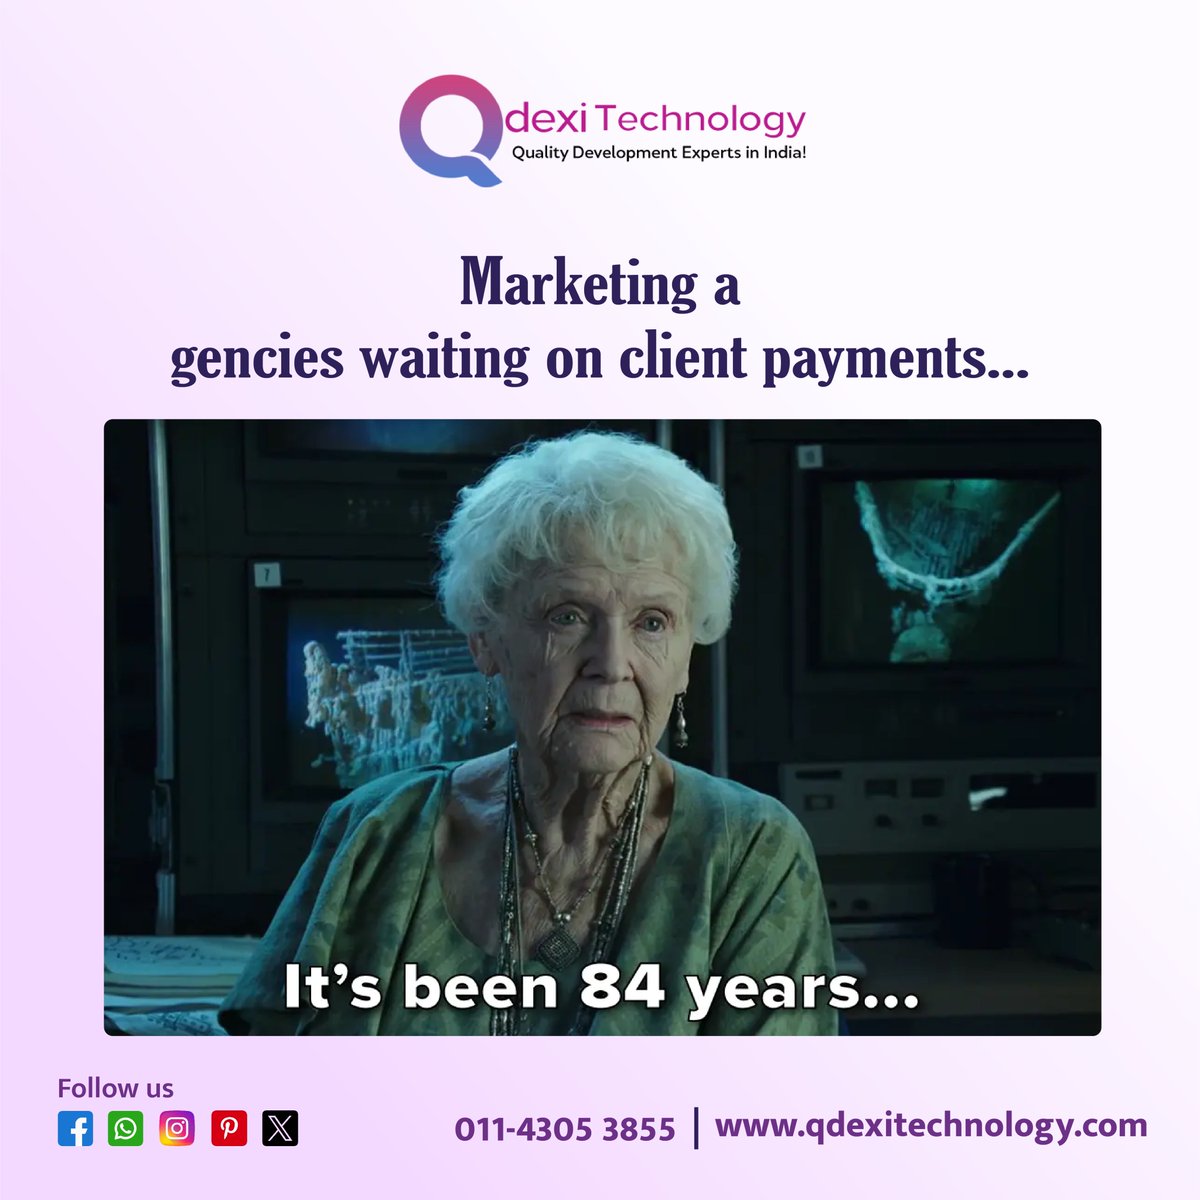 Marketing agencies in India are often delayed in receiving payments from clients, causing frustration. Qdexi Technology: Quality Solutions, Innovative Approaches.

#QualityDevelopment #ExpertiseInIndia #ClientPaymentDelays #MarketingAgencies
#FrustrationInBusiness